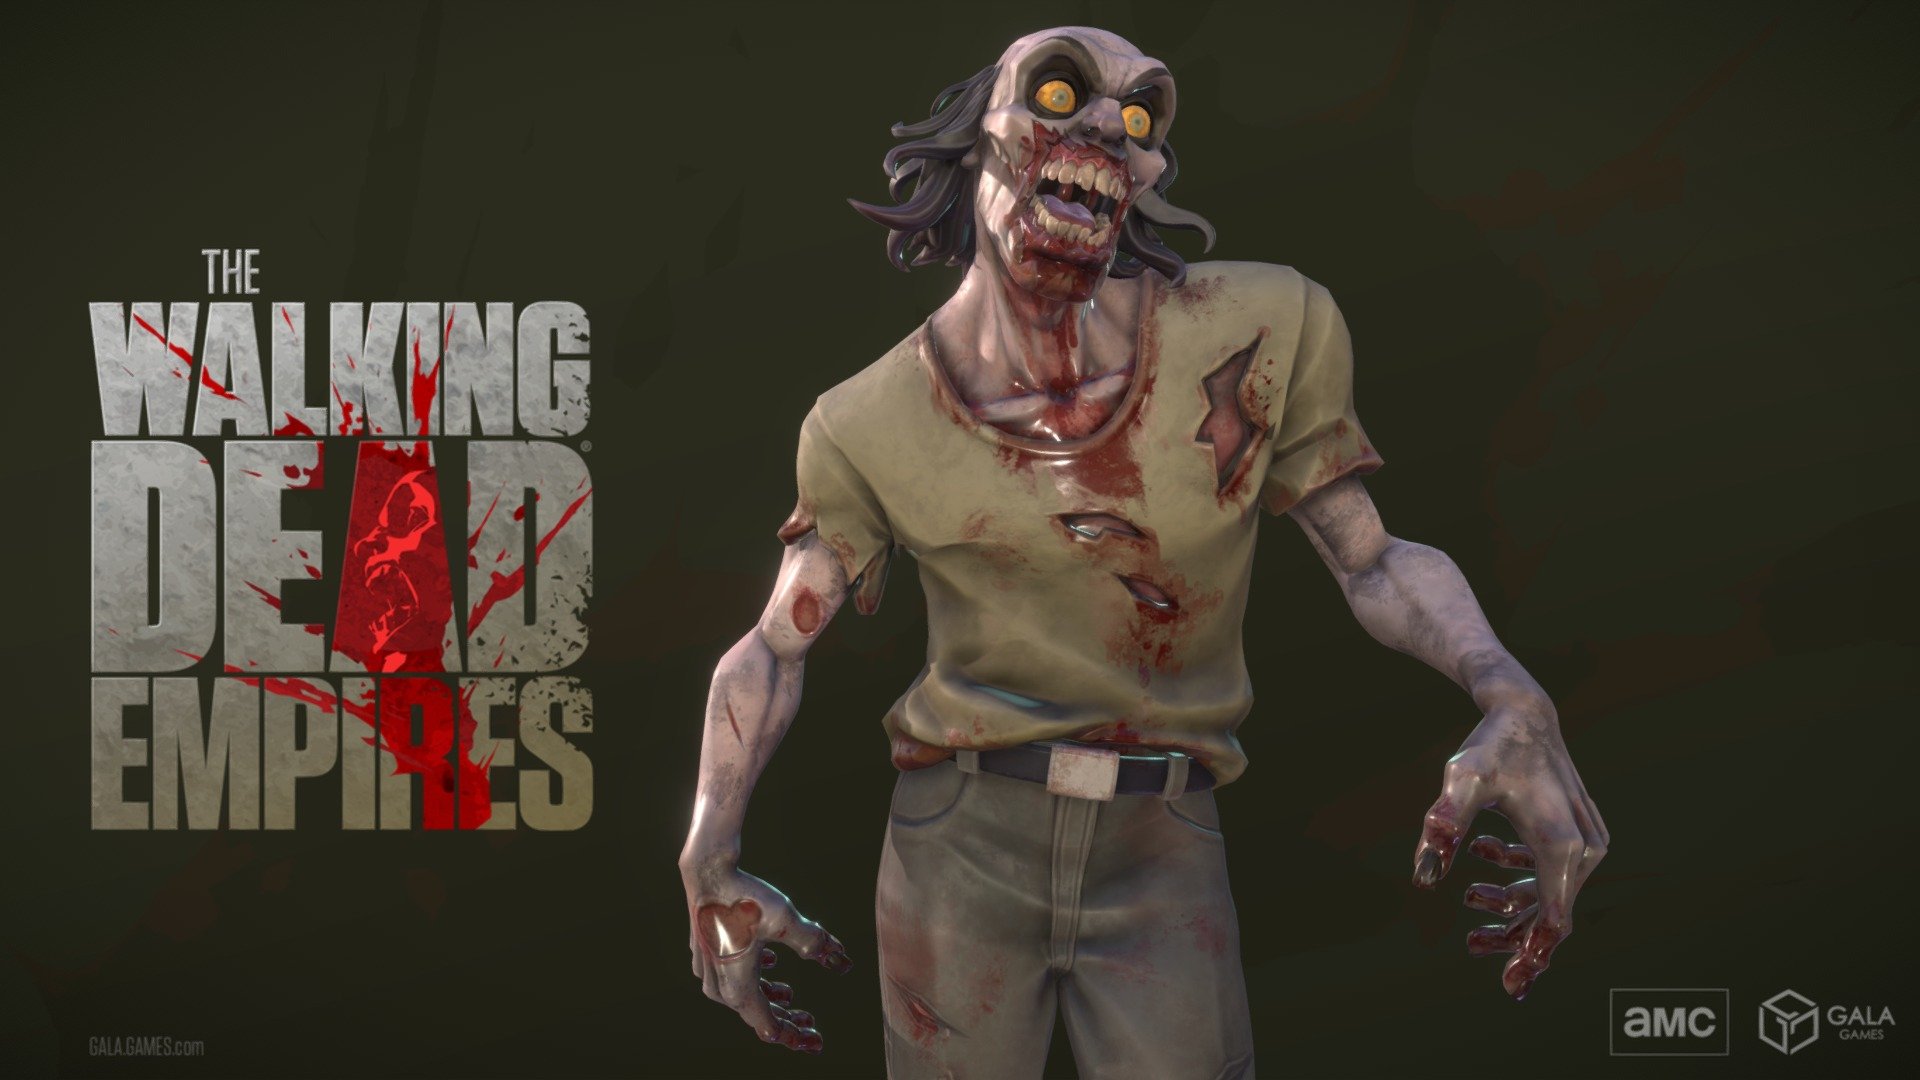 Come and play in the world of the Walking Dead Empires! A new MMO from Gala Games. Get your NFT's while supplies last, or just join in on the carnage and build your empire. (Free to play). Be sure to be out of arm's length or you'll get bit.

Our public development build is LIVE, download the game PC/MAC today at - gala.games - The Walking Dead Empires: Walker - Wes - 3D model by emberk2 3d model